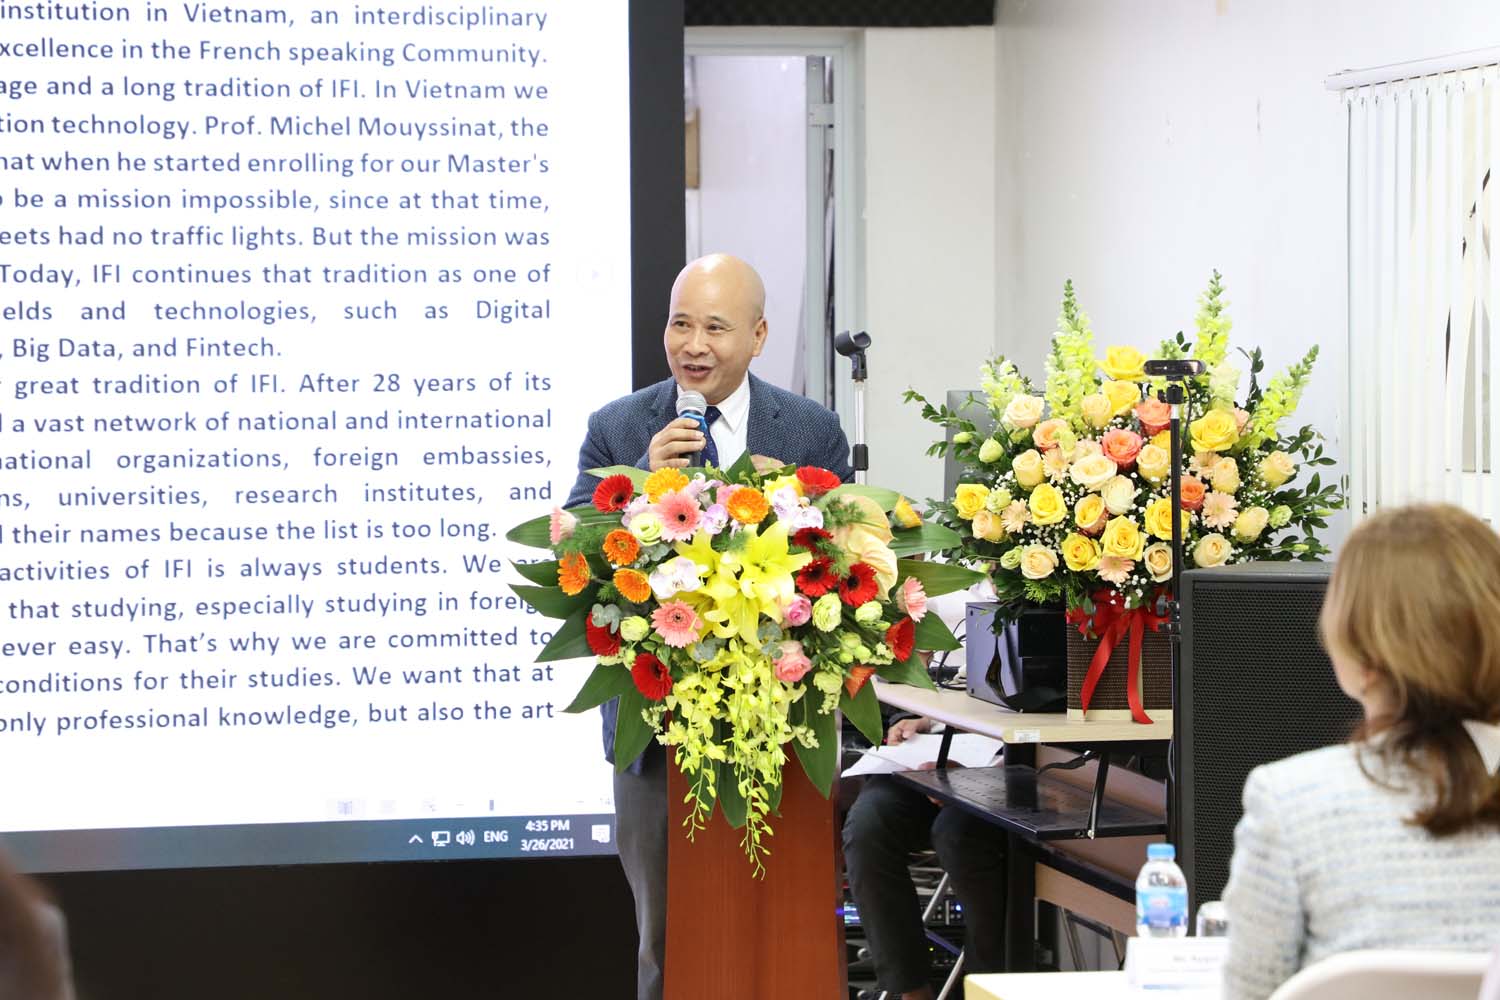 Dr. Ngo Tu Lap, President of the Scientific Council, Director